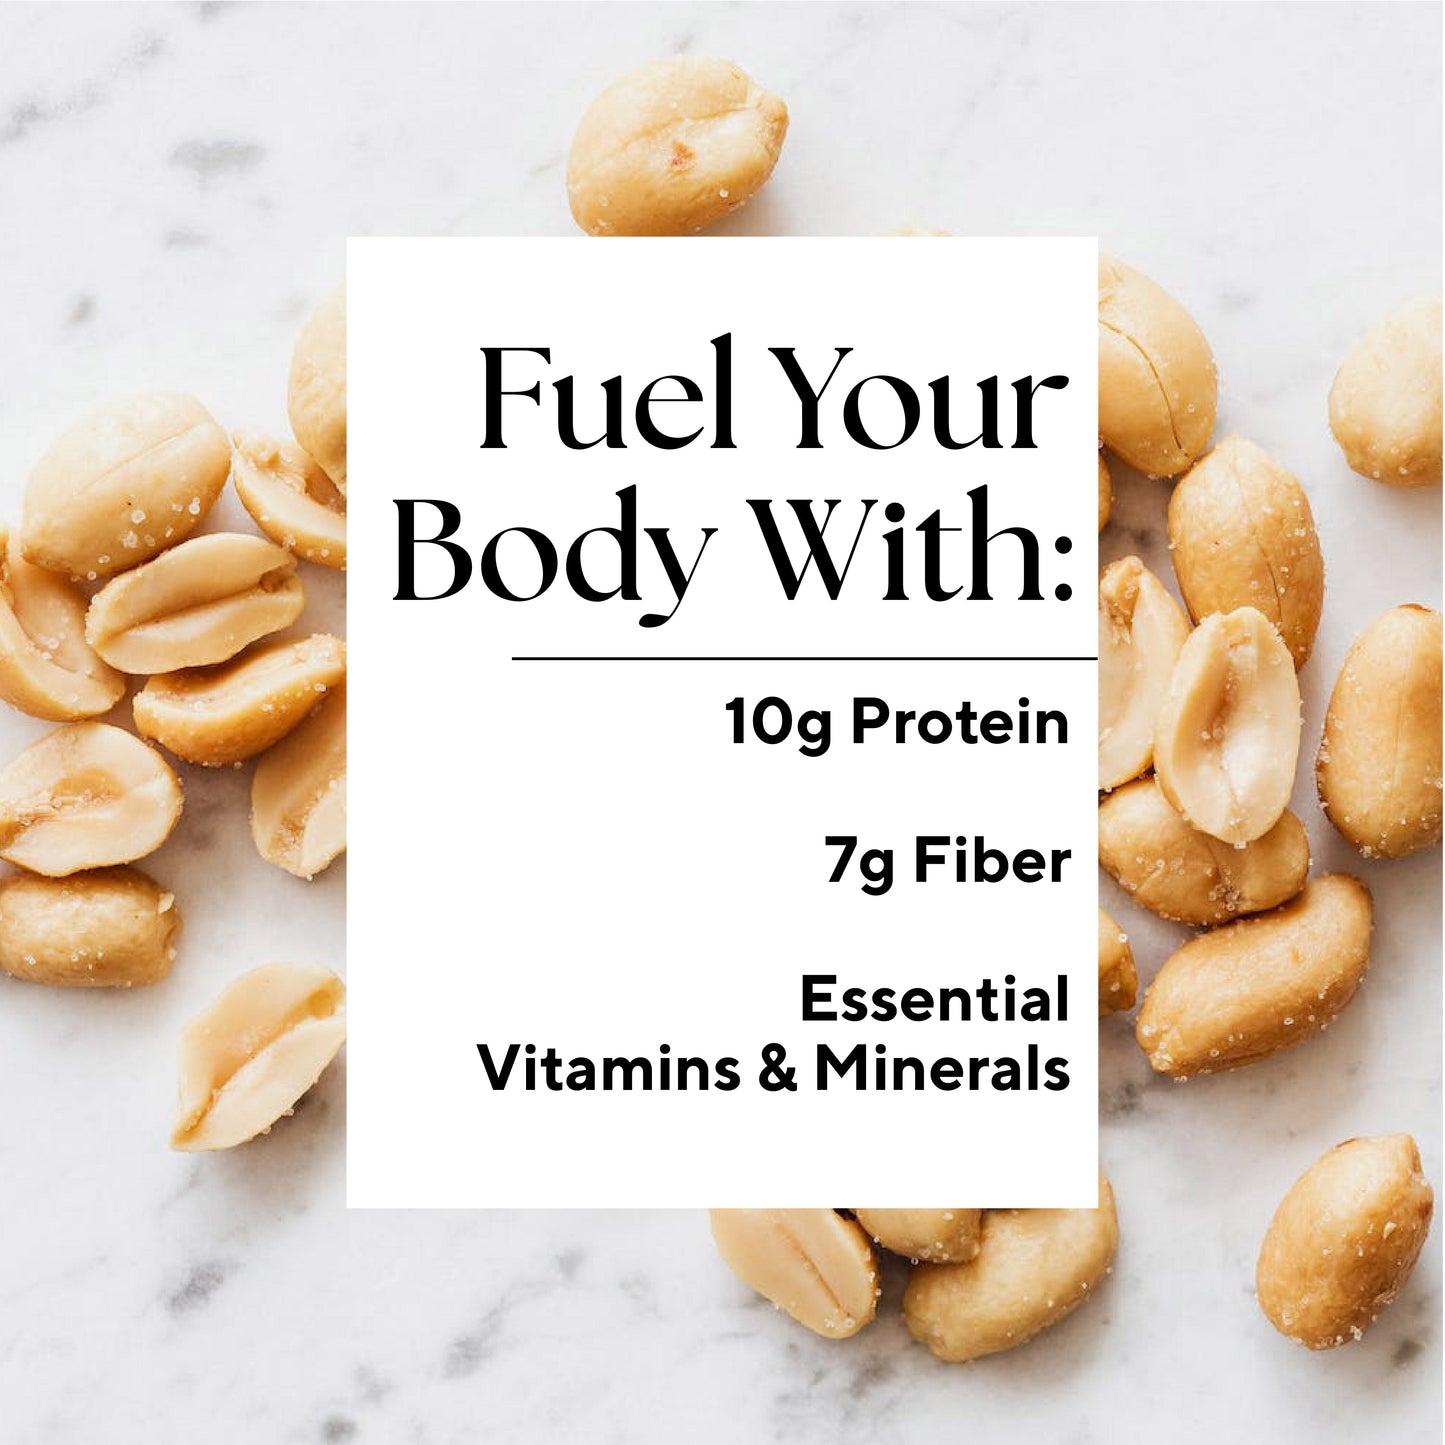 Infographic that reads: "Fuel your body with: 10g Protein, 7g Fiber, Essential Vitamins & Minerals"